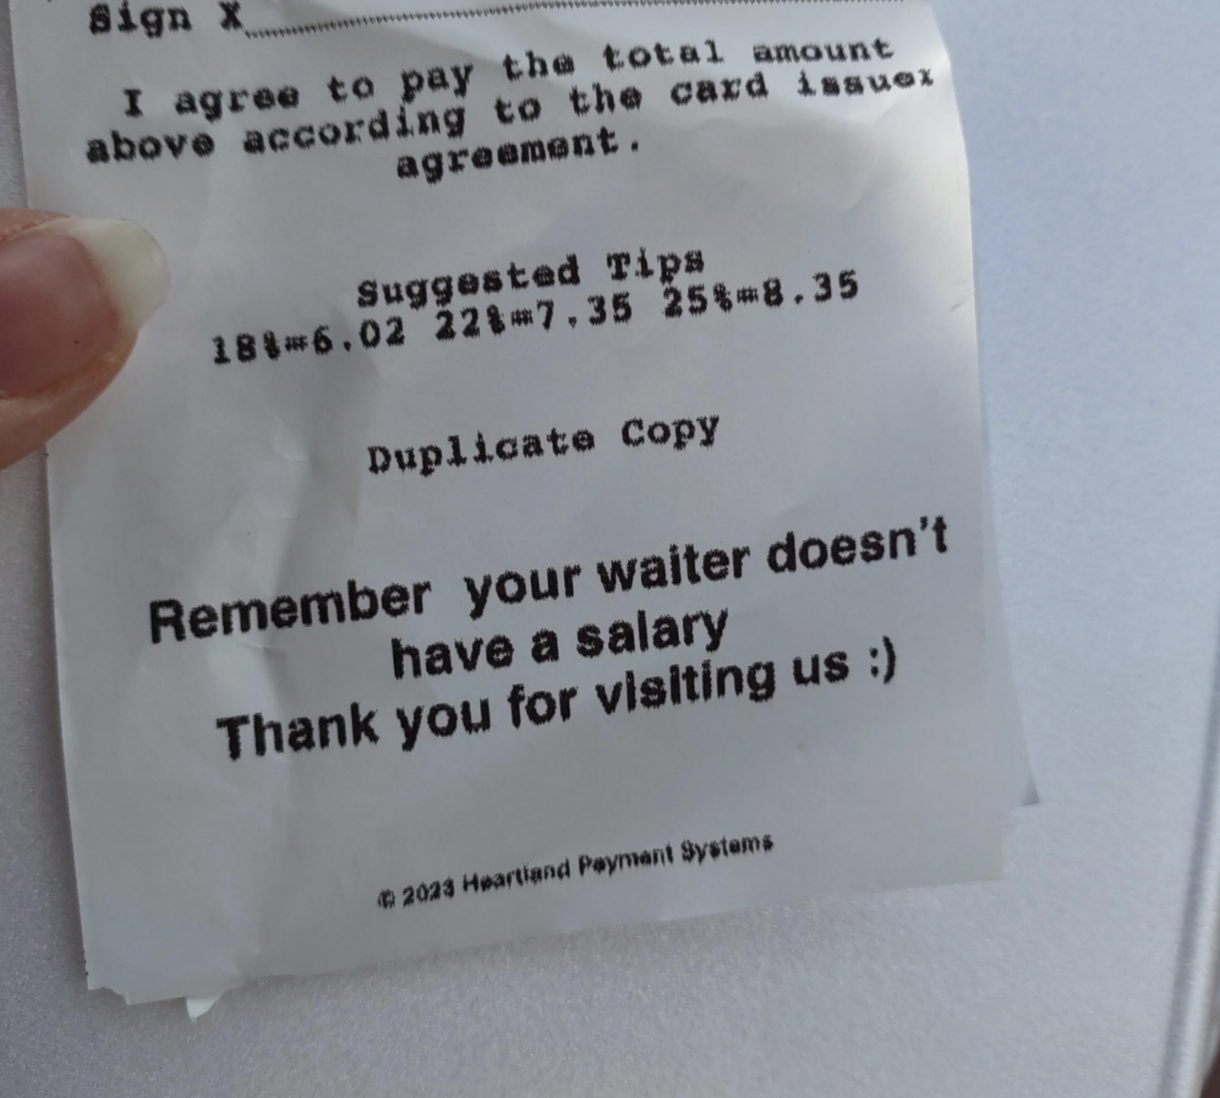 on the bottom of the receipt it says, remmeber your waiter doesn&#x27;t have a salary thank you for visiting us